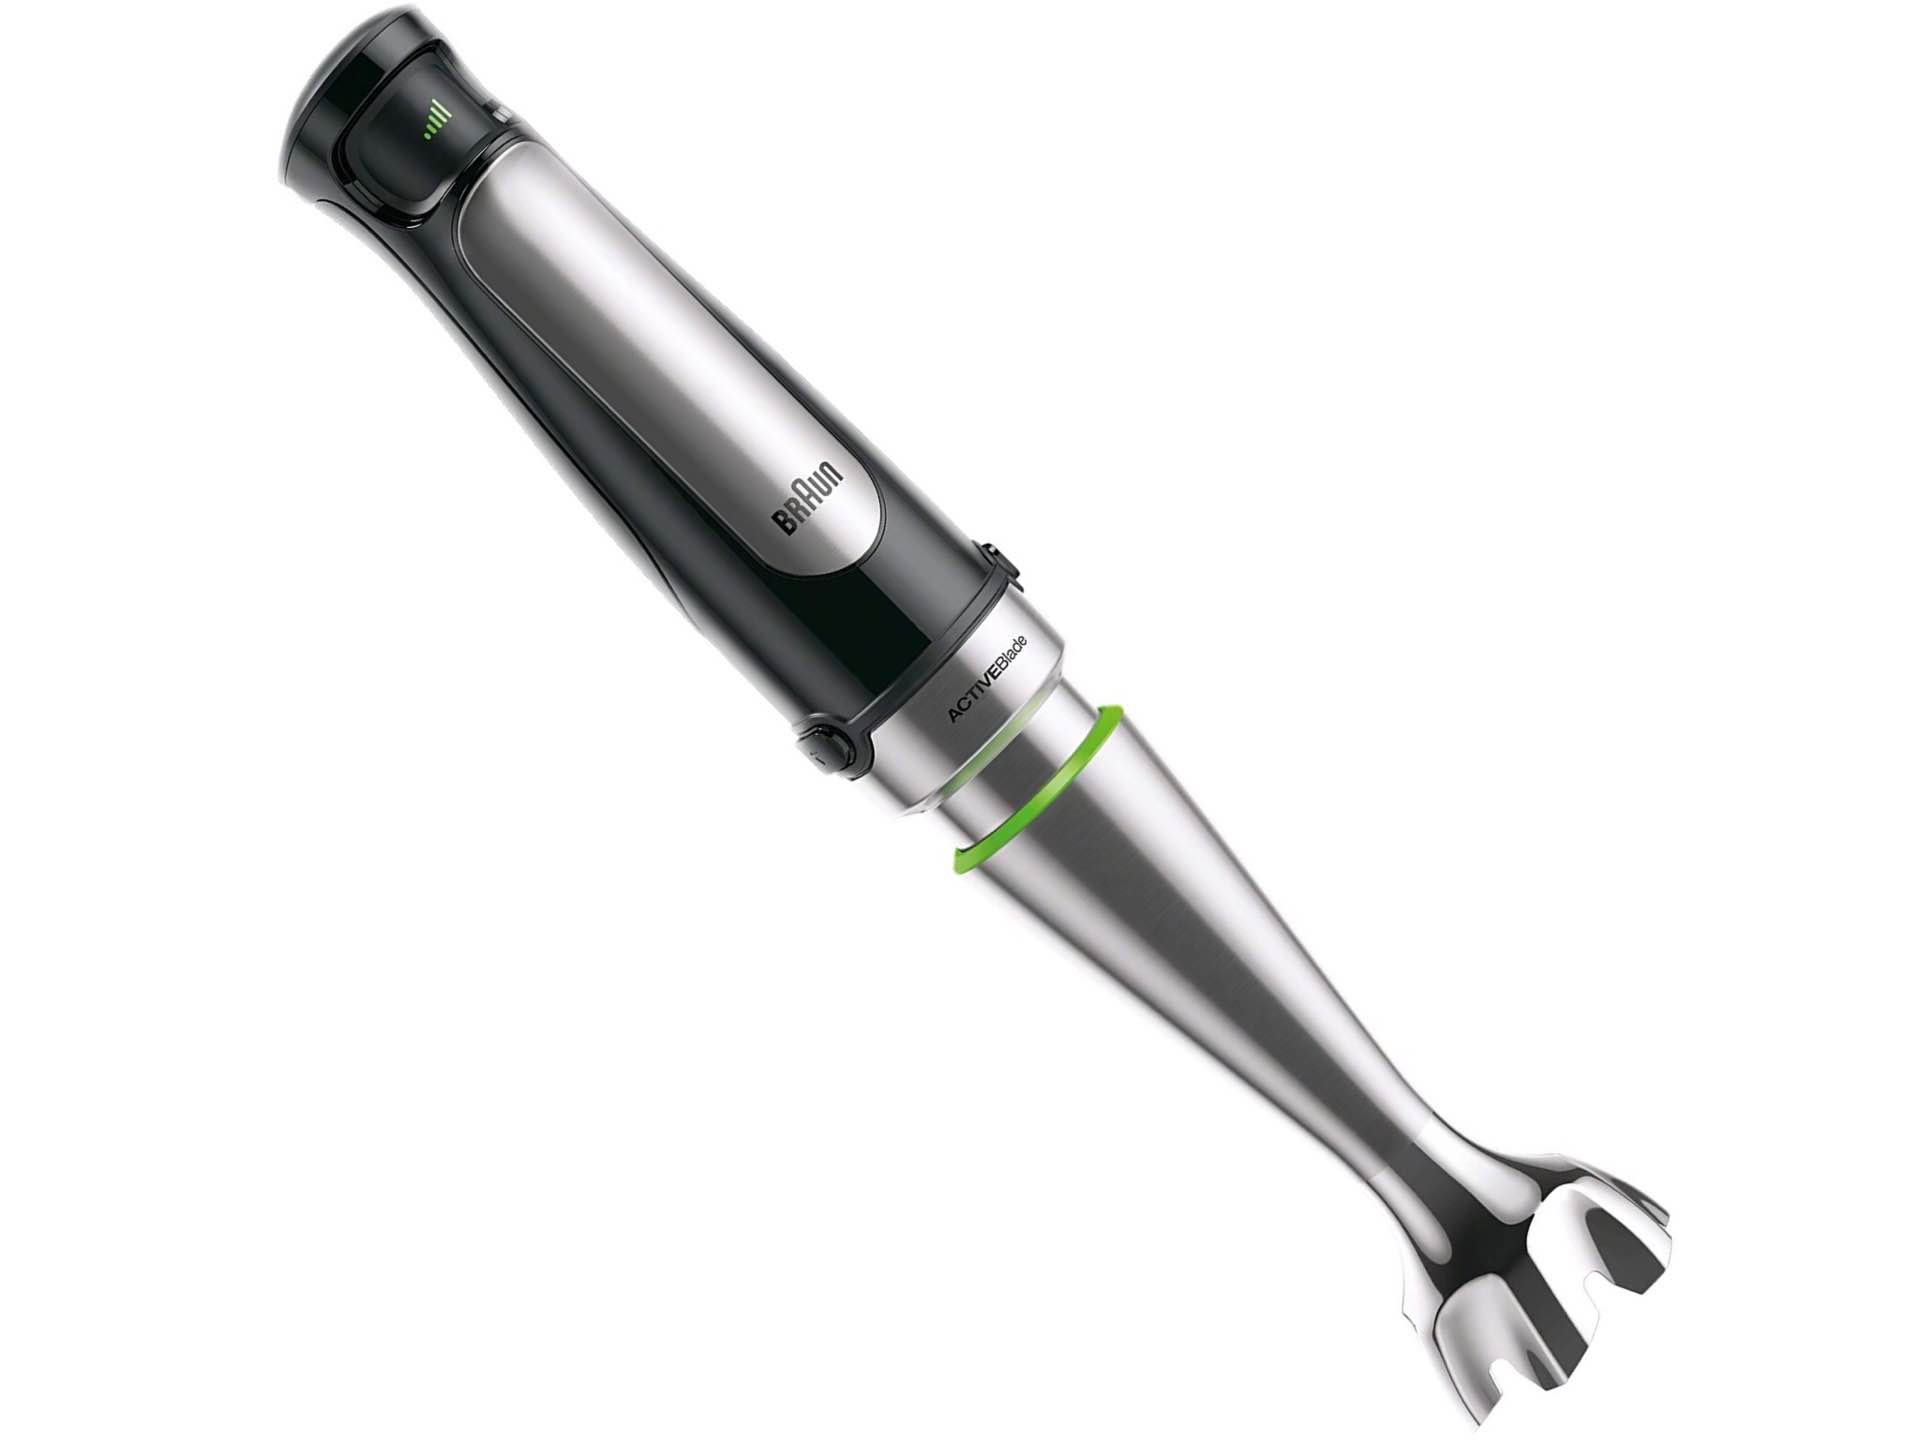 Braun Multiquick 7 Immersion Hand Blender — Tools and Toys